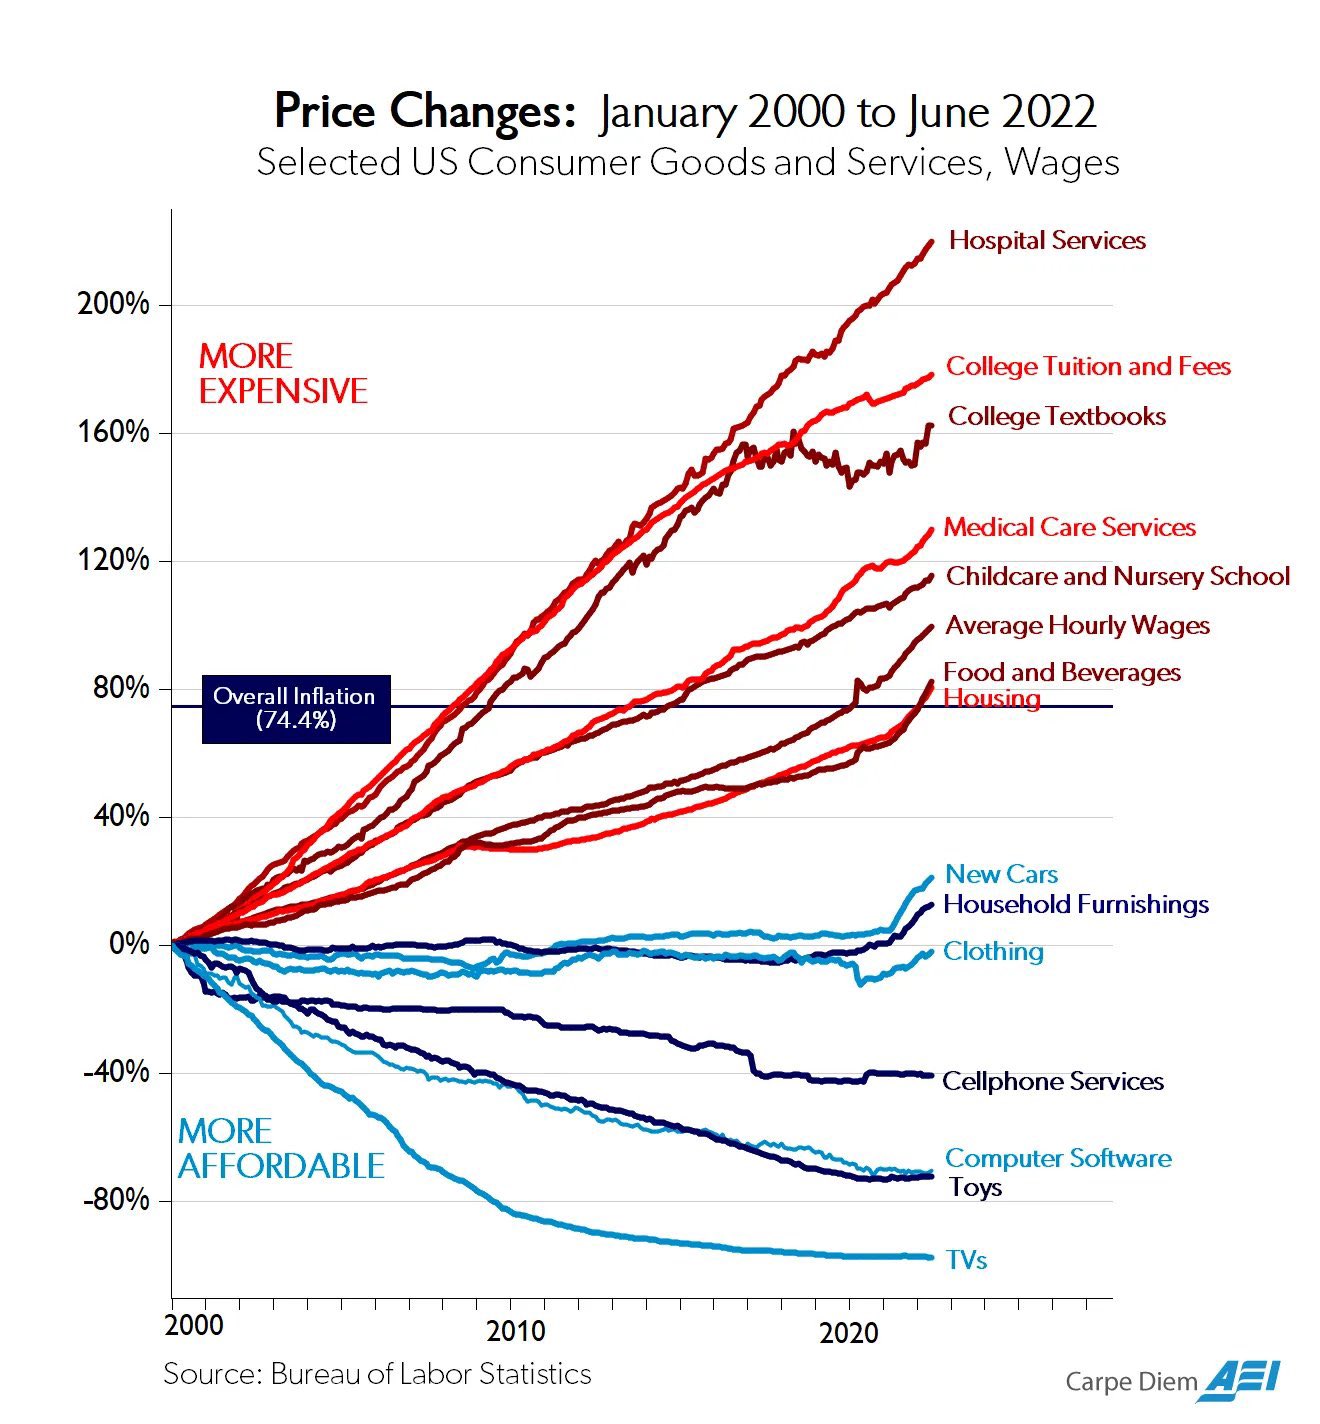 Price Changes in Consumer Goods and Services 2000 - 2022